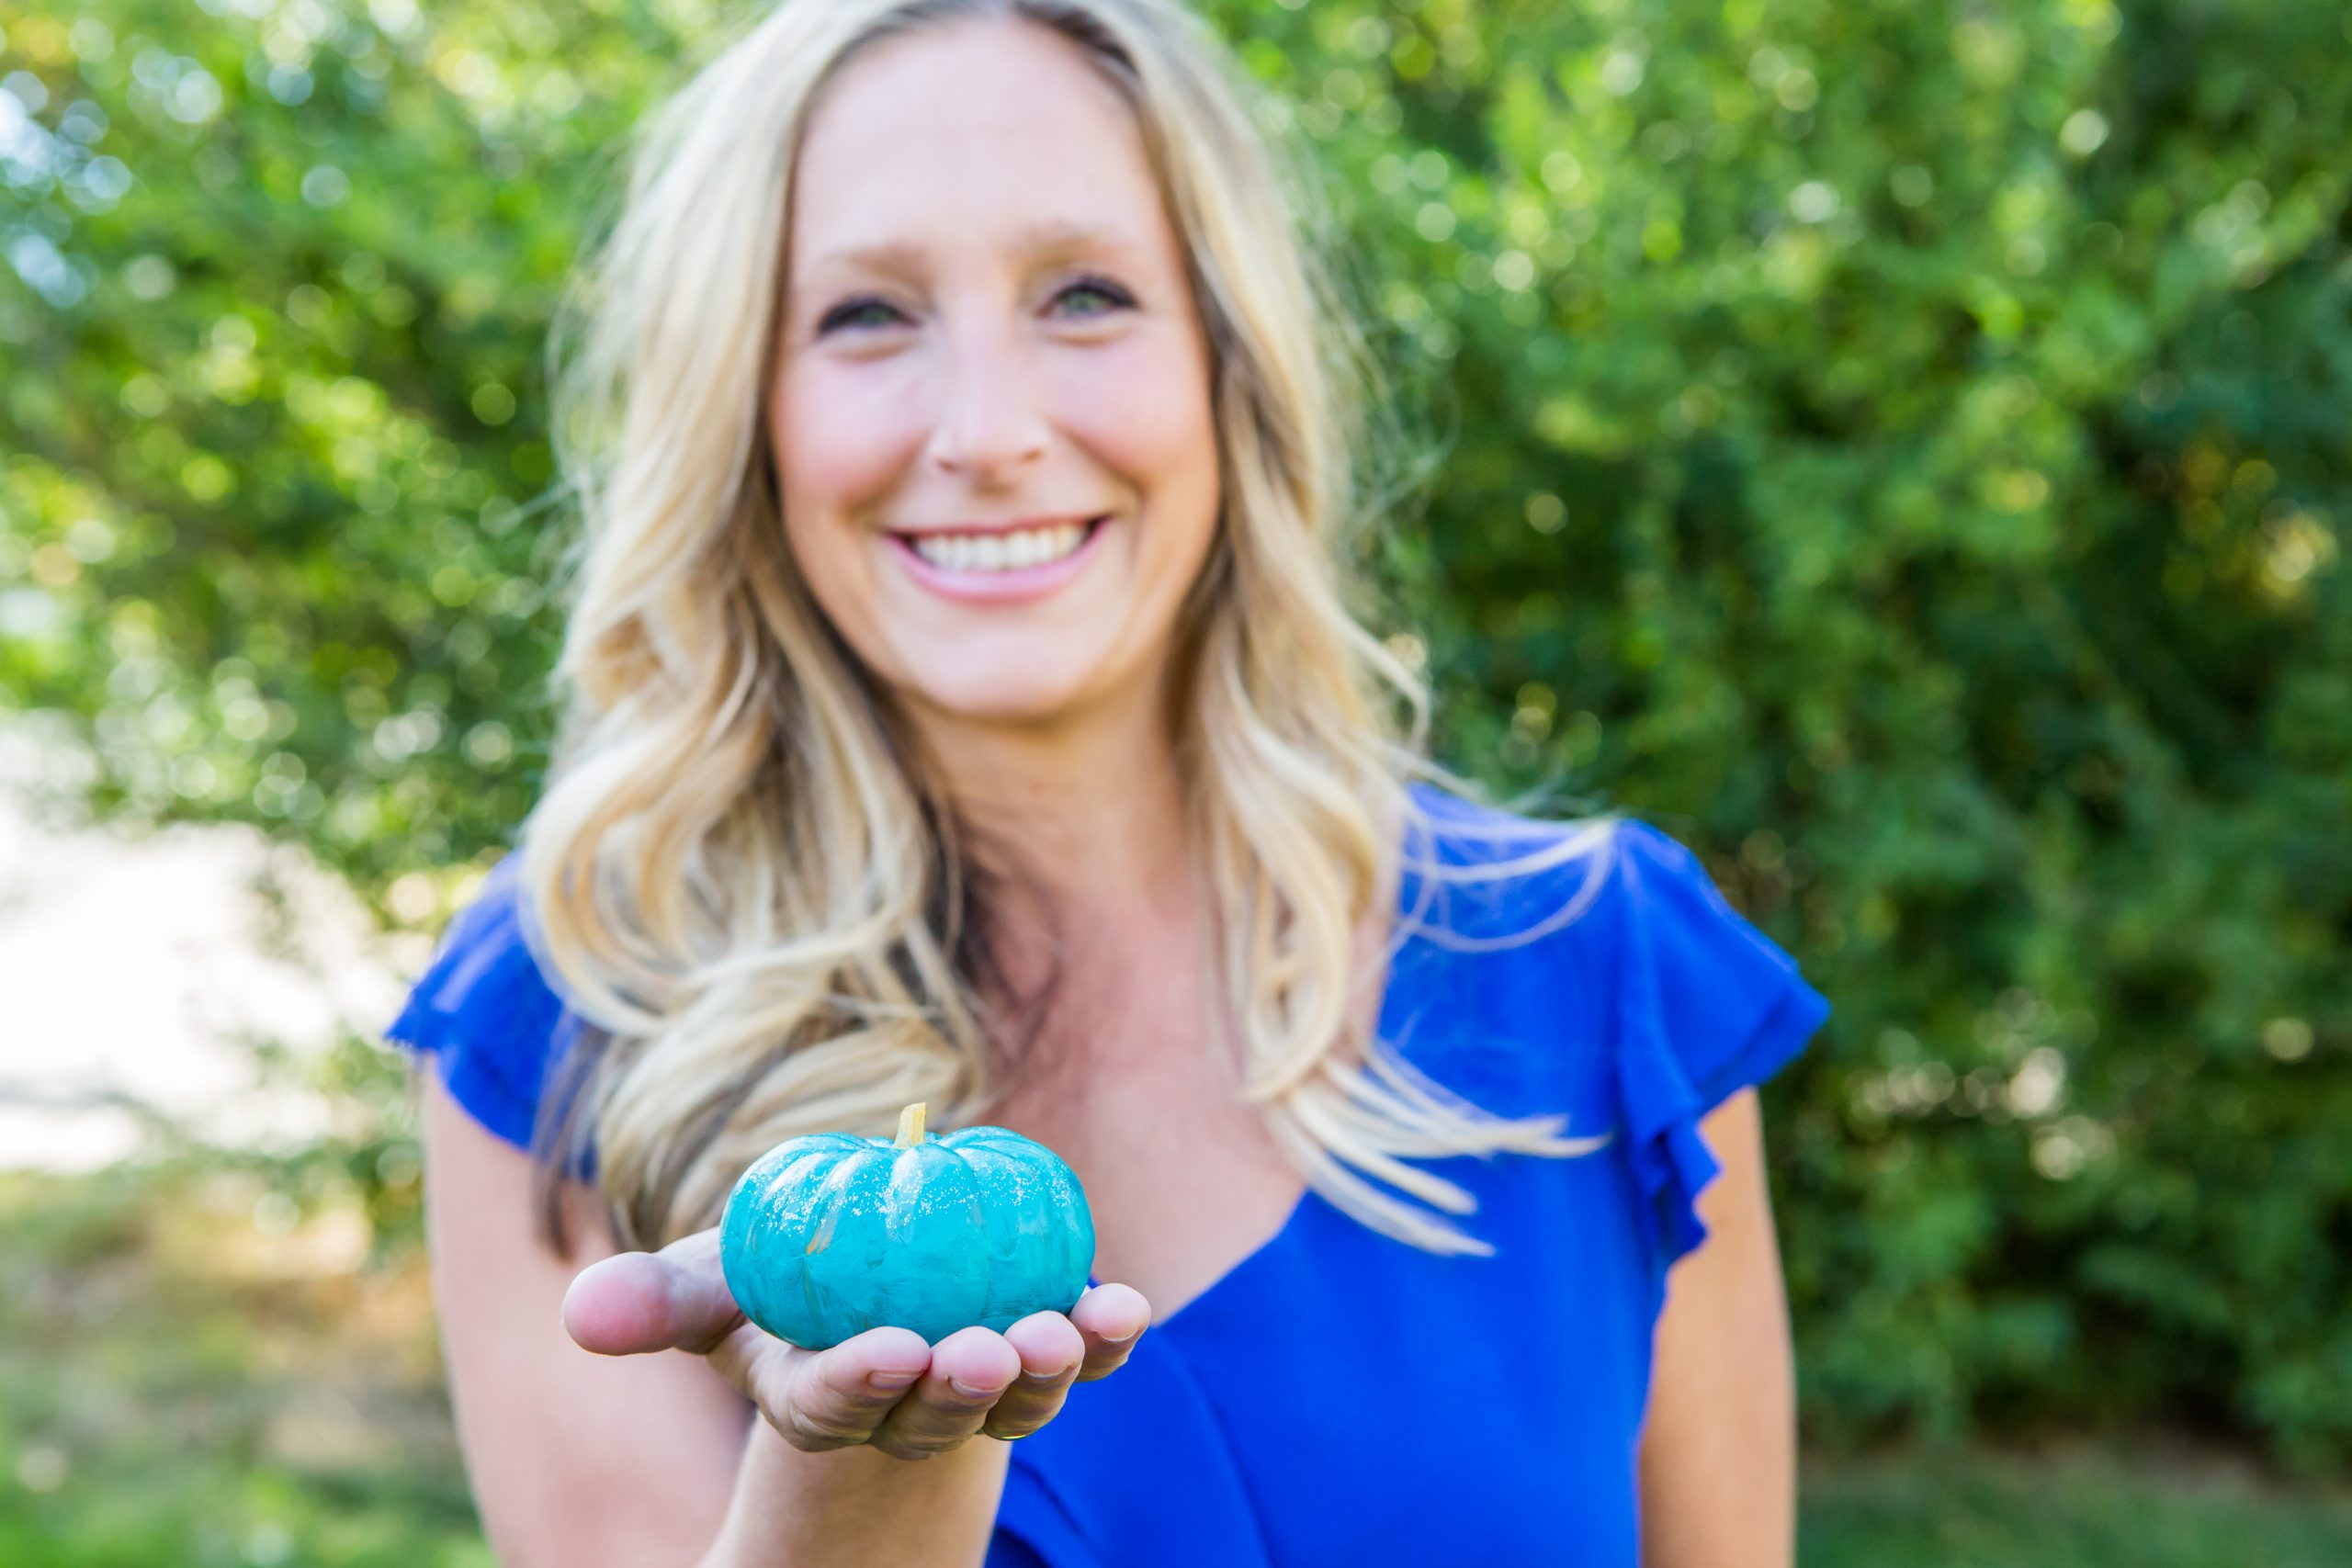 Blond woman holding teal pumpkin in her palm outdoors